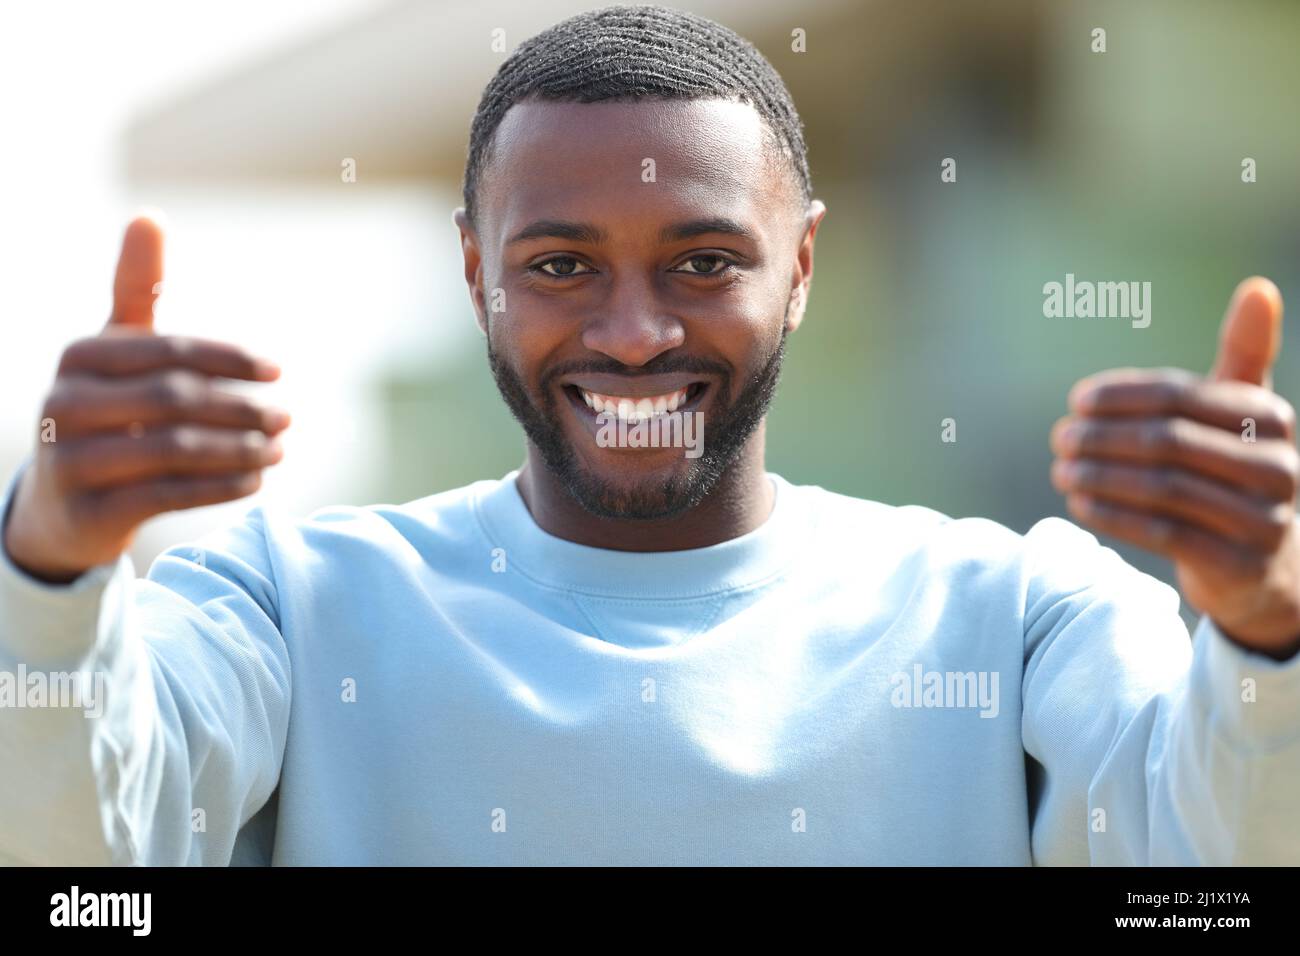 Front view portrait of a happy man with black skin saying come in the street Stock Photo